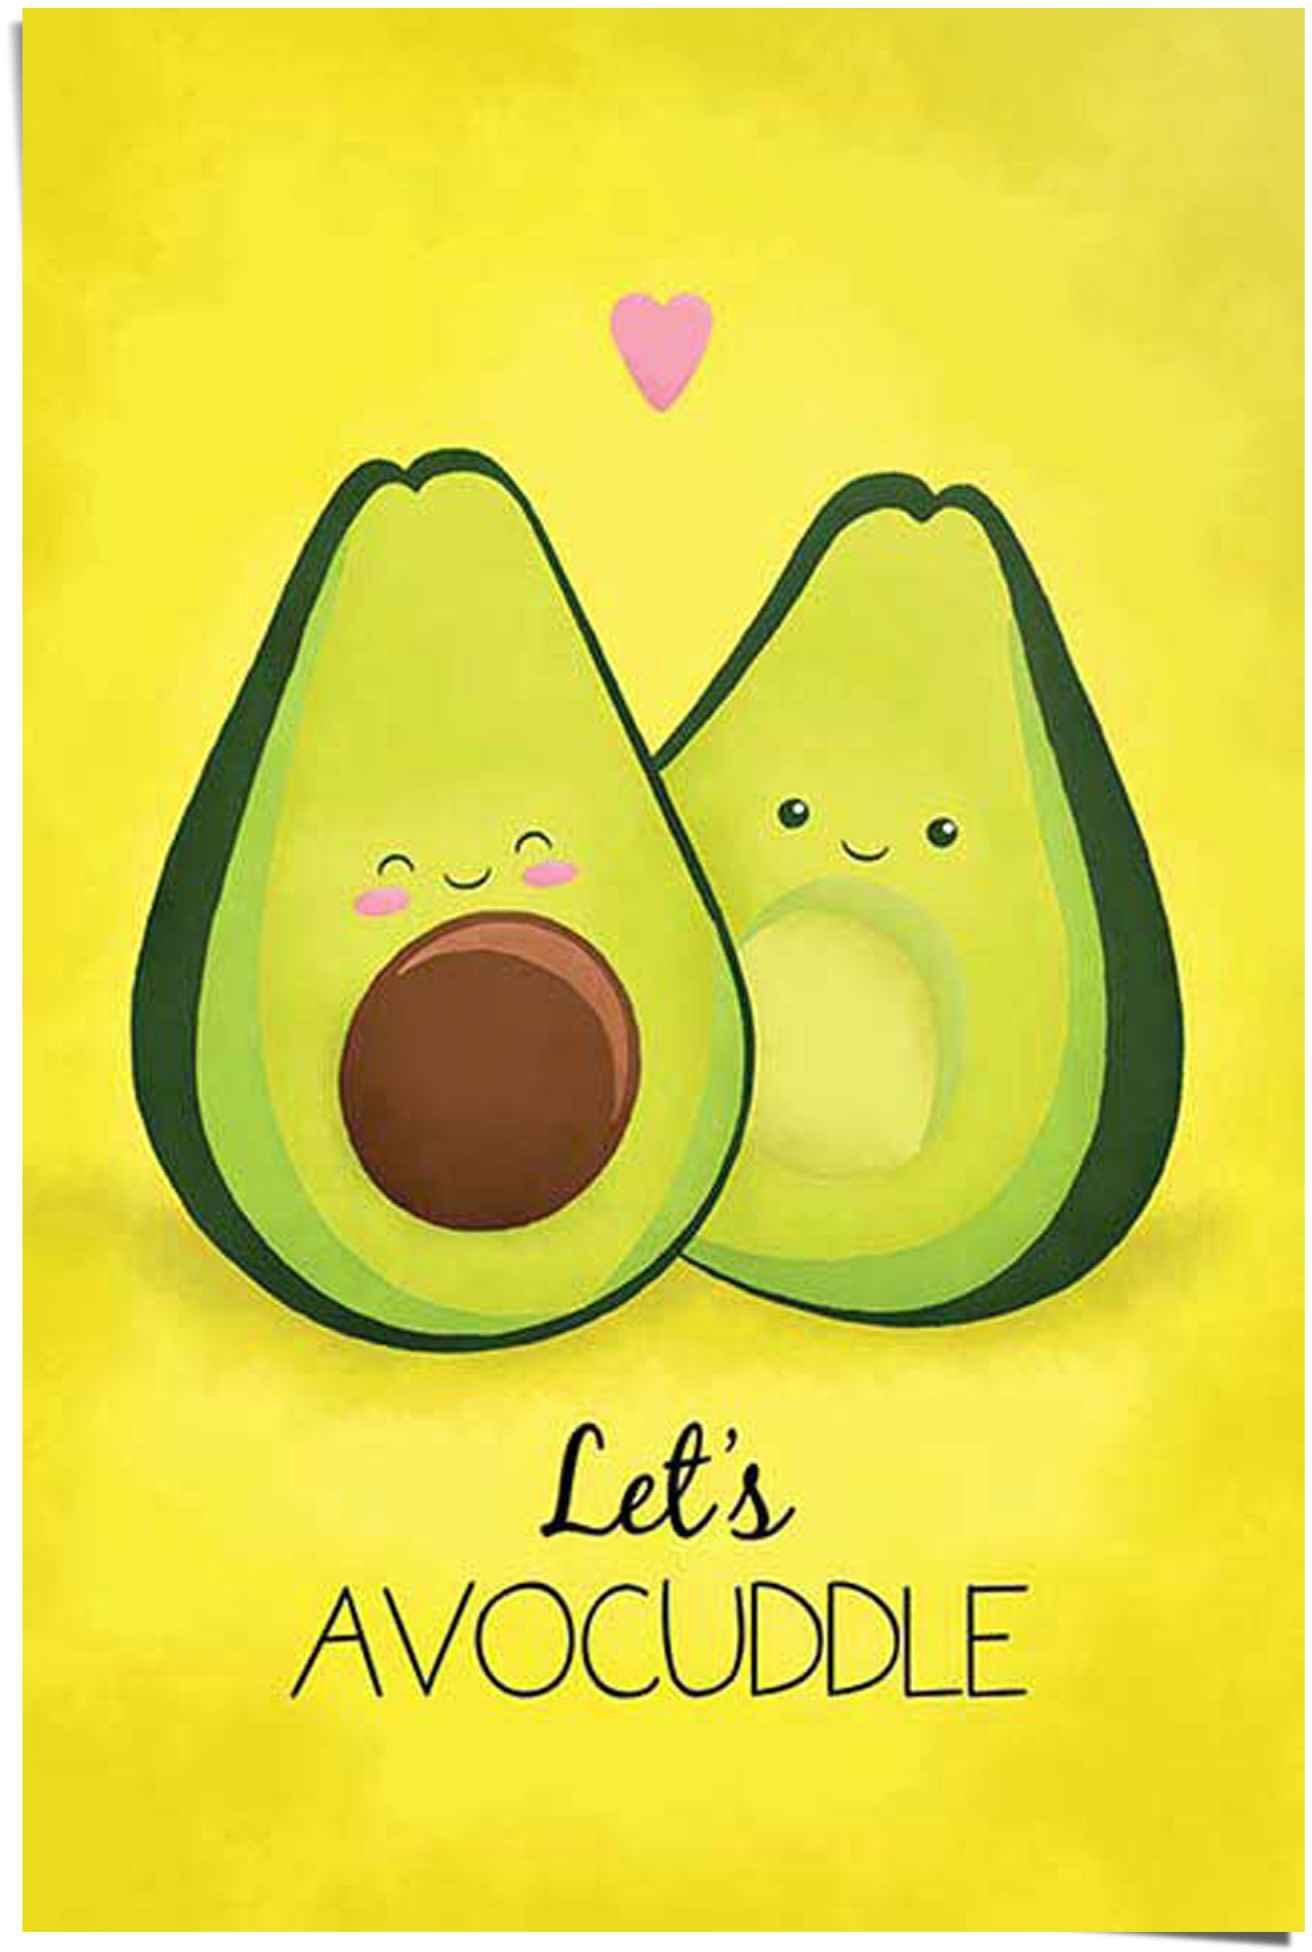 Reinders! (1 Poster avocuddle, let´s St) Avocado